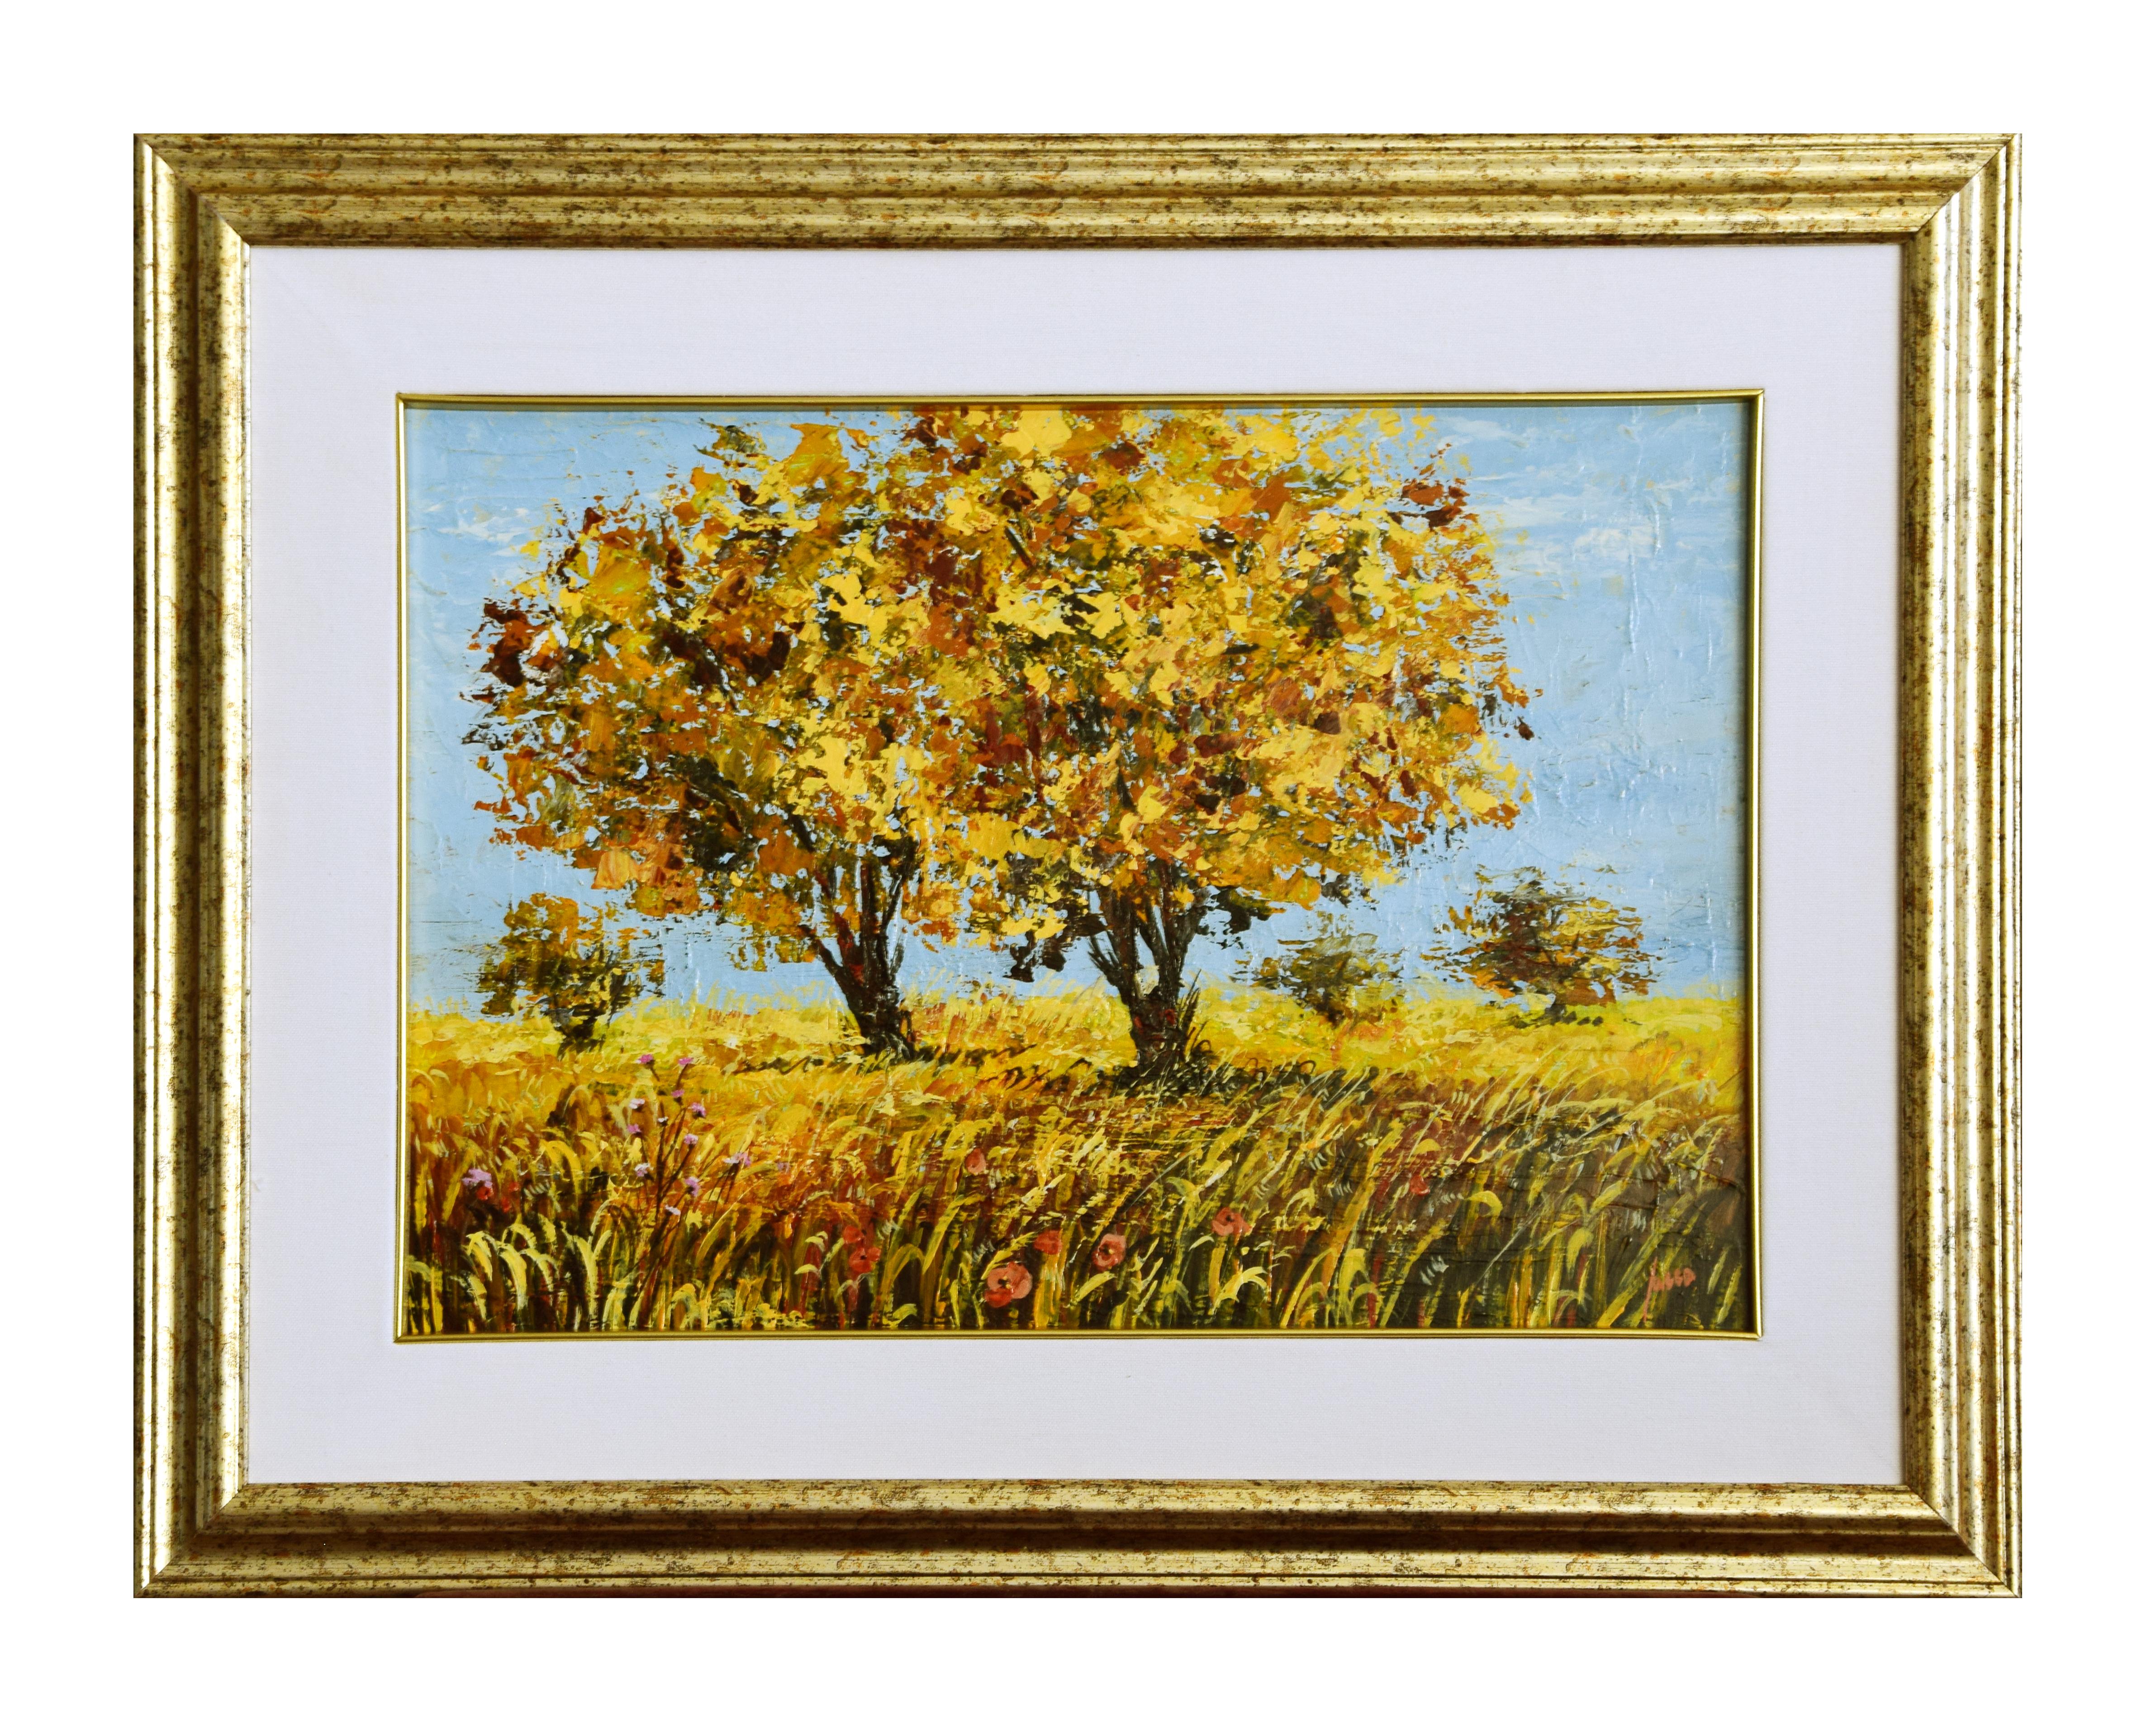 "Summer" is an enchanting oil painting realized by the Italian contemporary artist Luciano Sacco.

Including a frame (53 x 68 cm). Hand-signed by the artist on the lower right.

This beautiful painting represents a field of wheat and flowers with